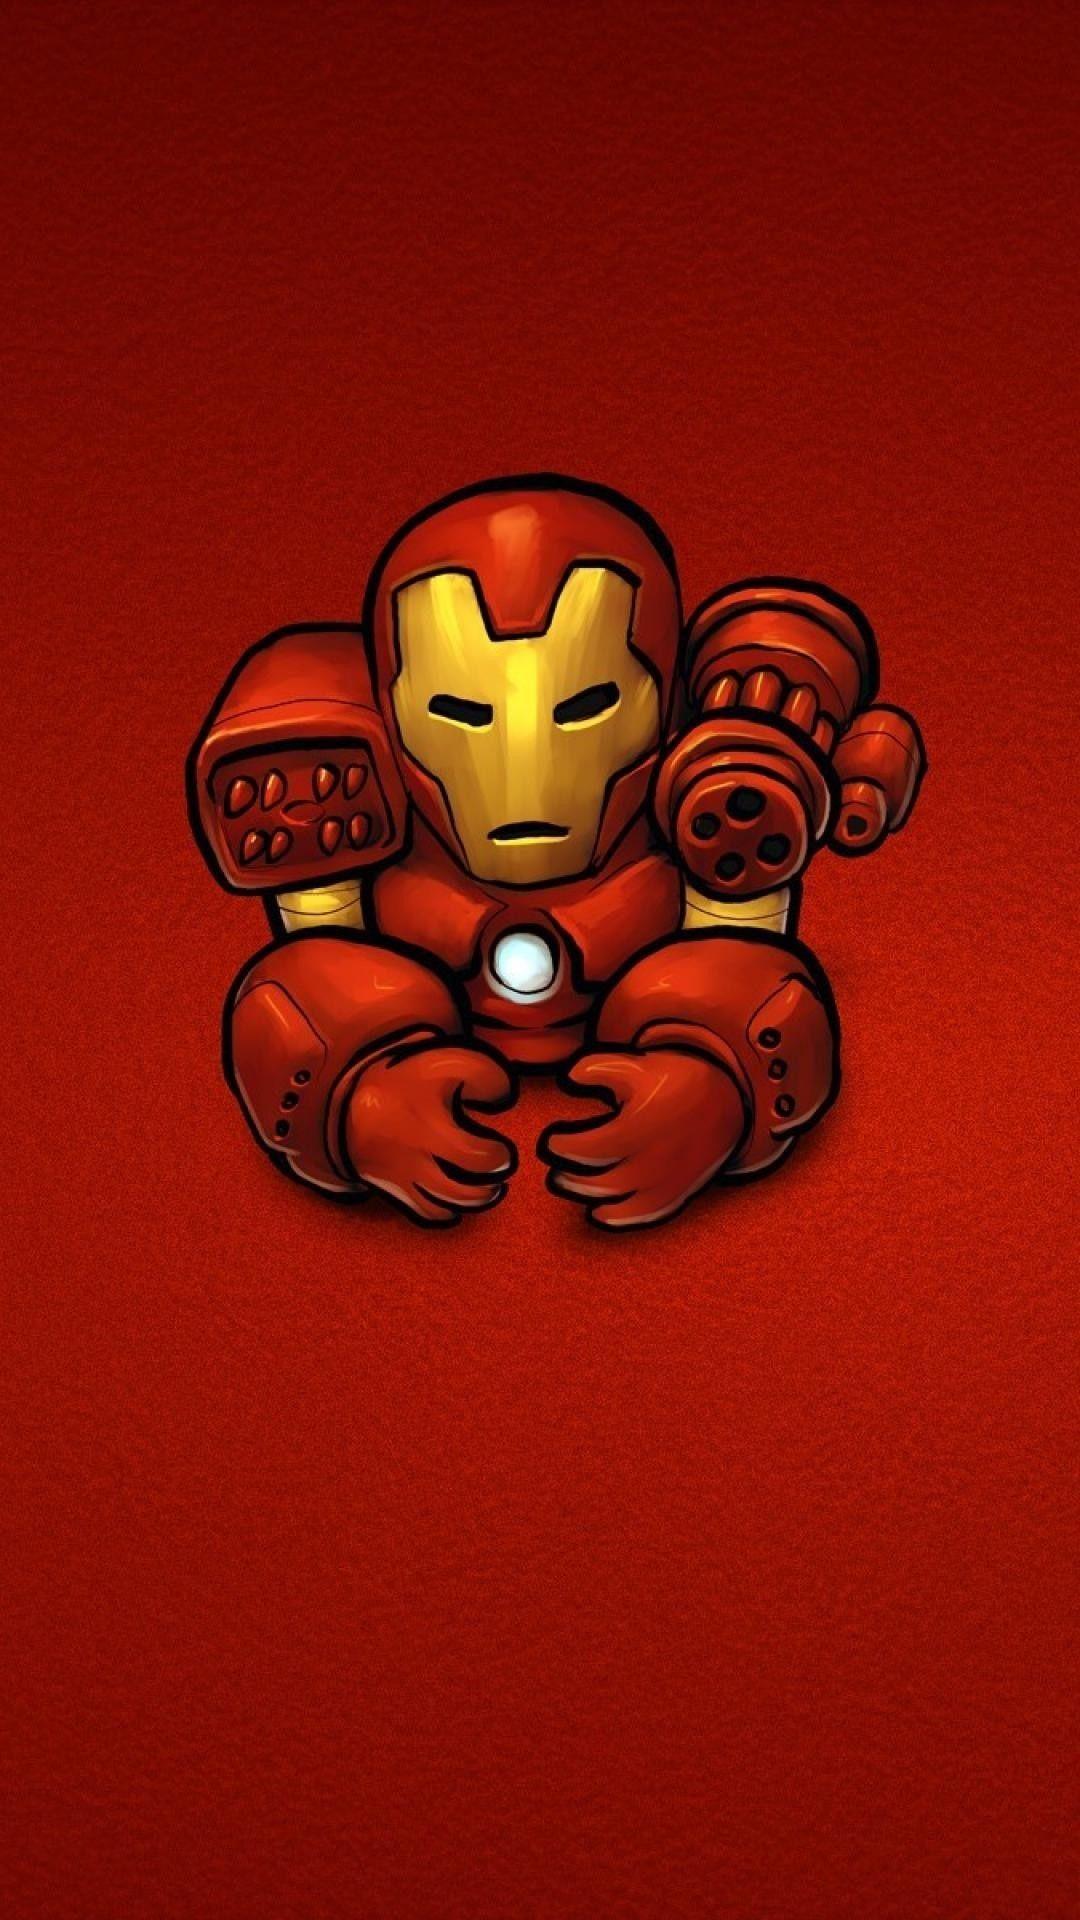 Ironman HD Wallpaper for iPhone 7